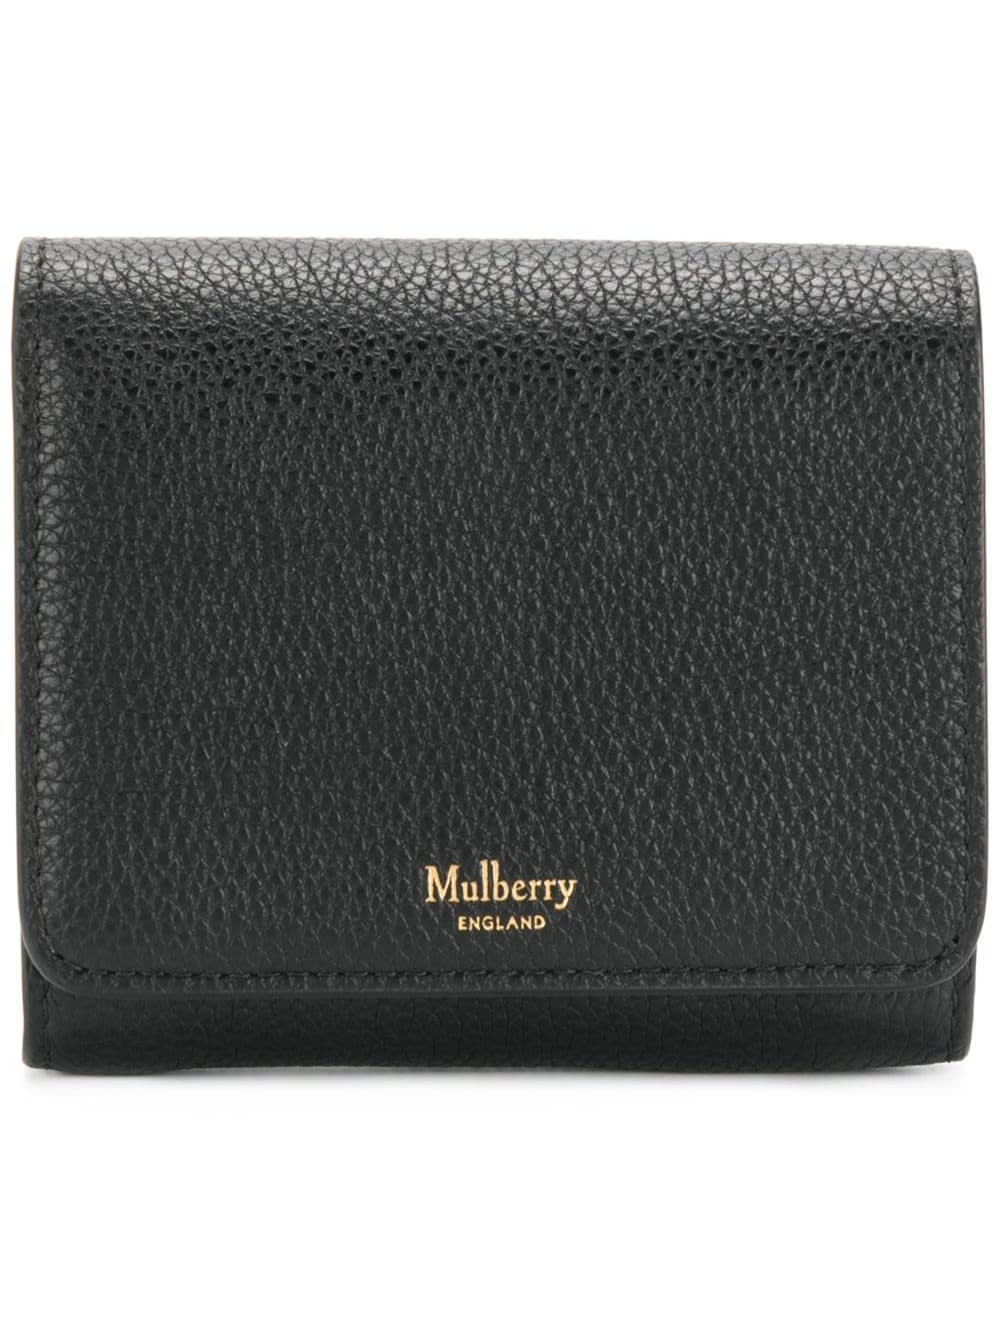 MULBERRY BLACK LEATHER WALLET WITH LOGO